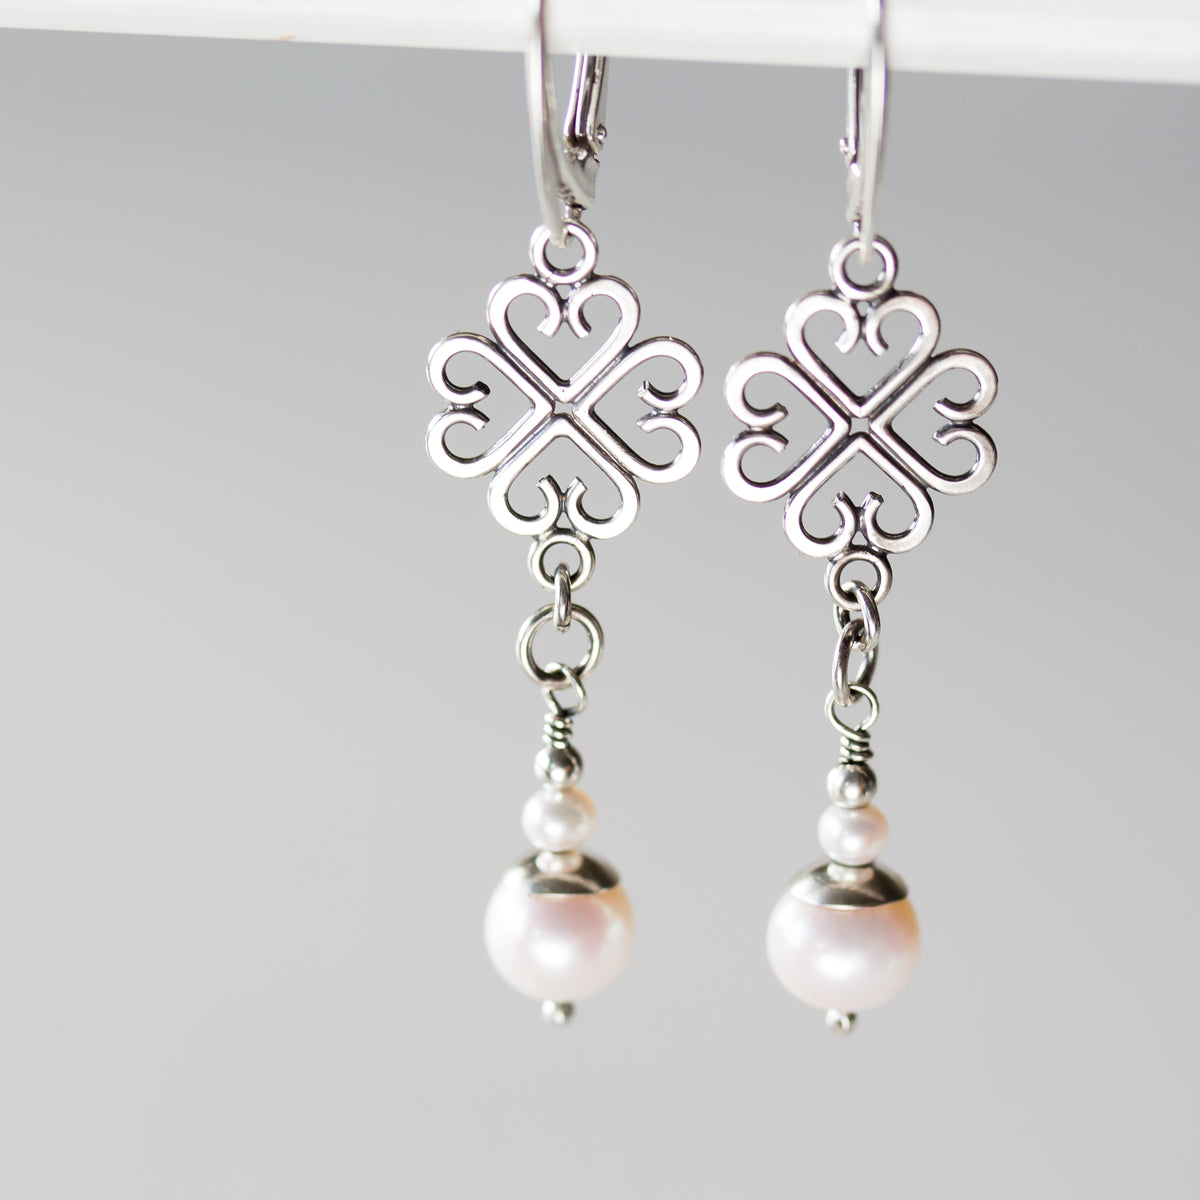 Long Elegant Pearl Earrings, Four Leaf Clover and White Pearl